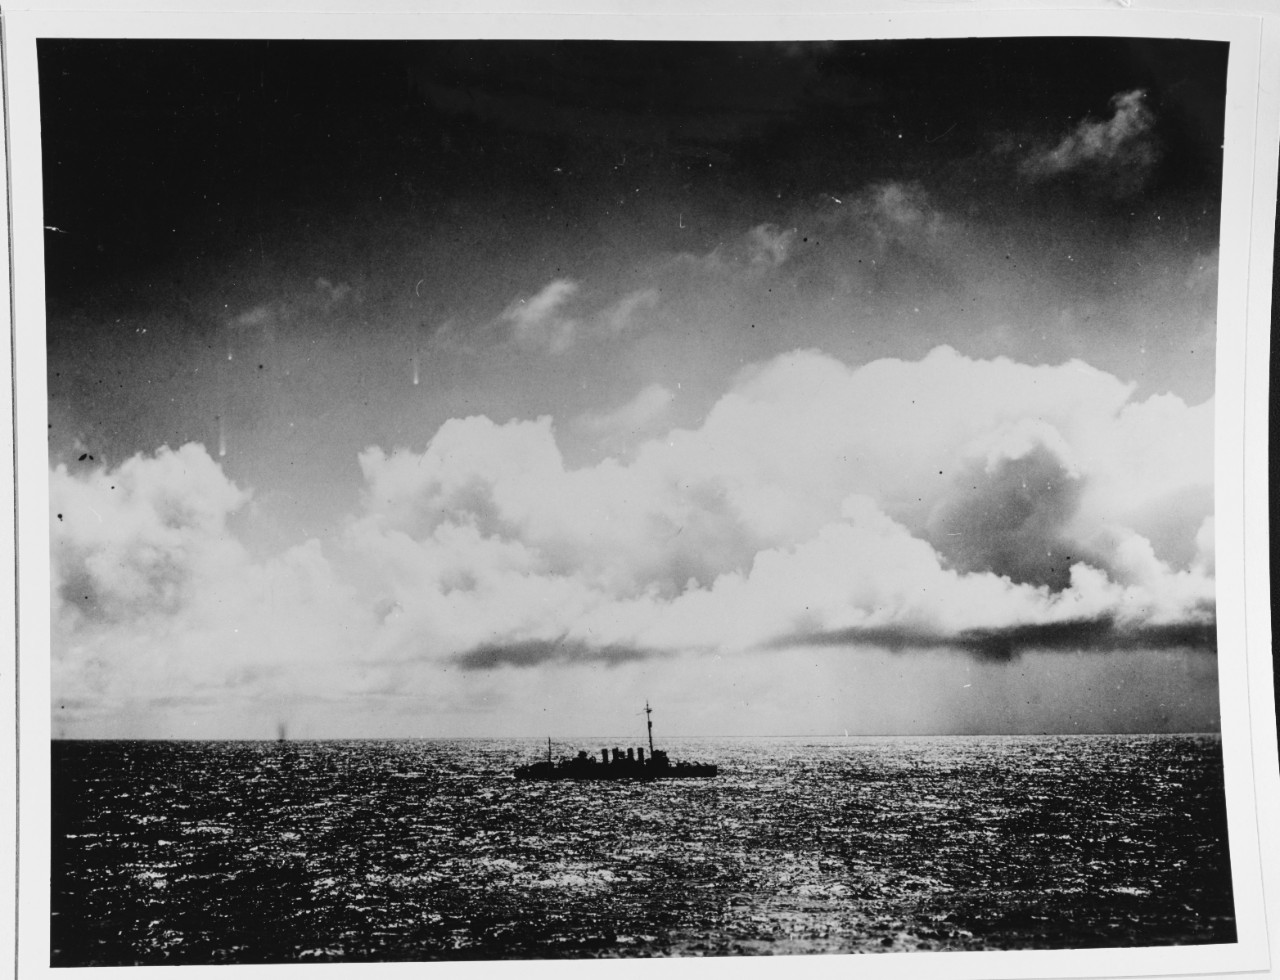 A United States Navy destroyer at sea in 1920